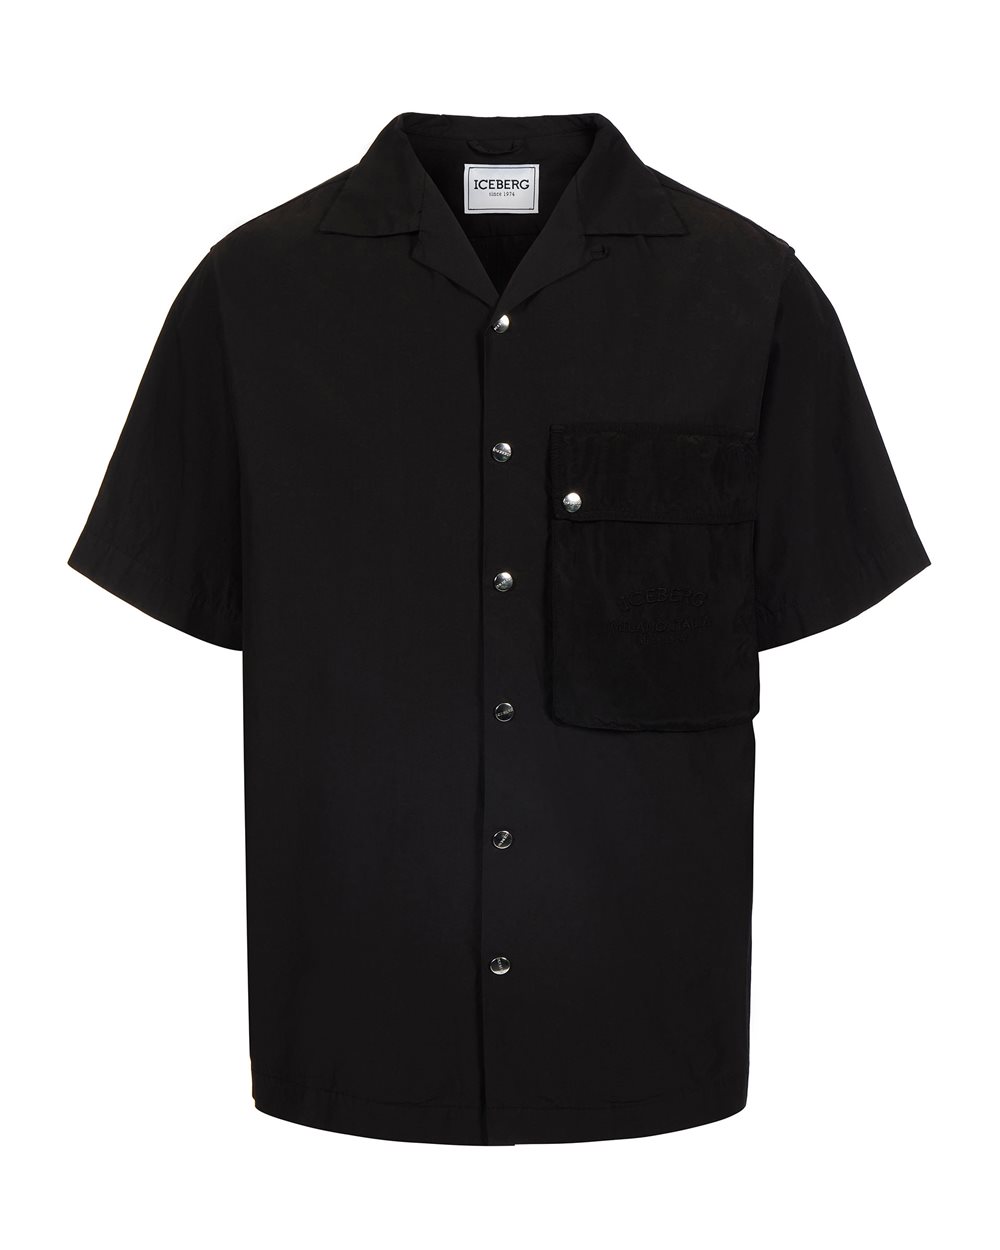 Shirt with institutional logo - shirts | Iceberg - Official Website